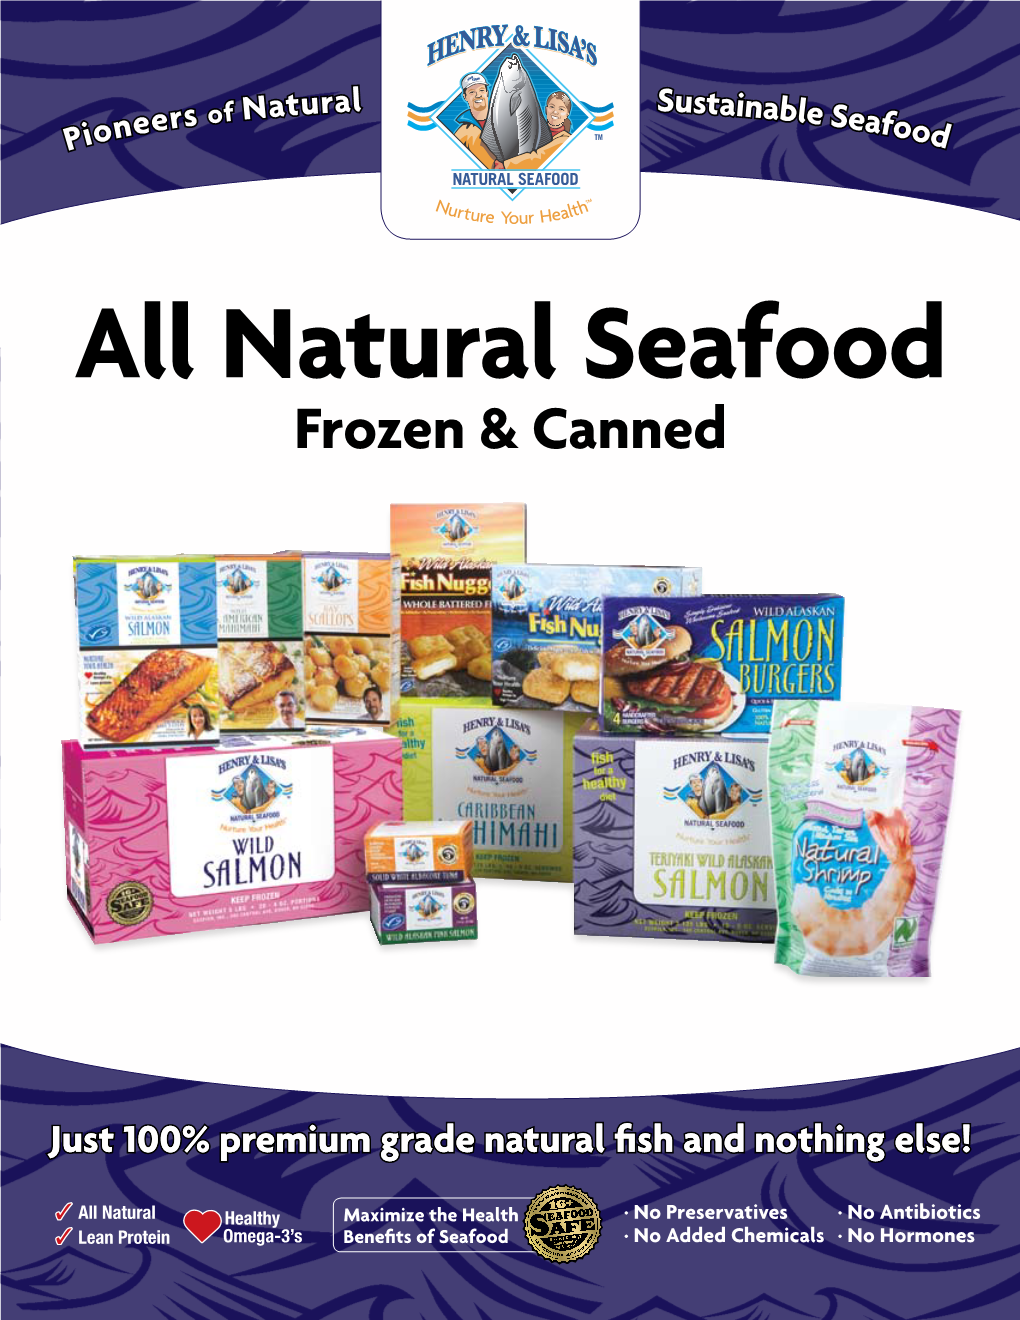 All Natural Seafood Frozen & Canned